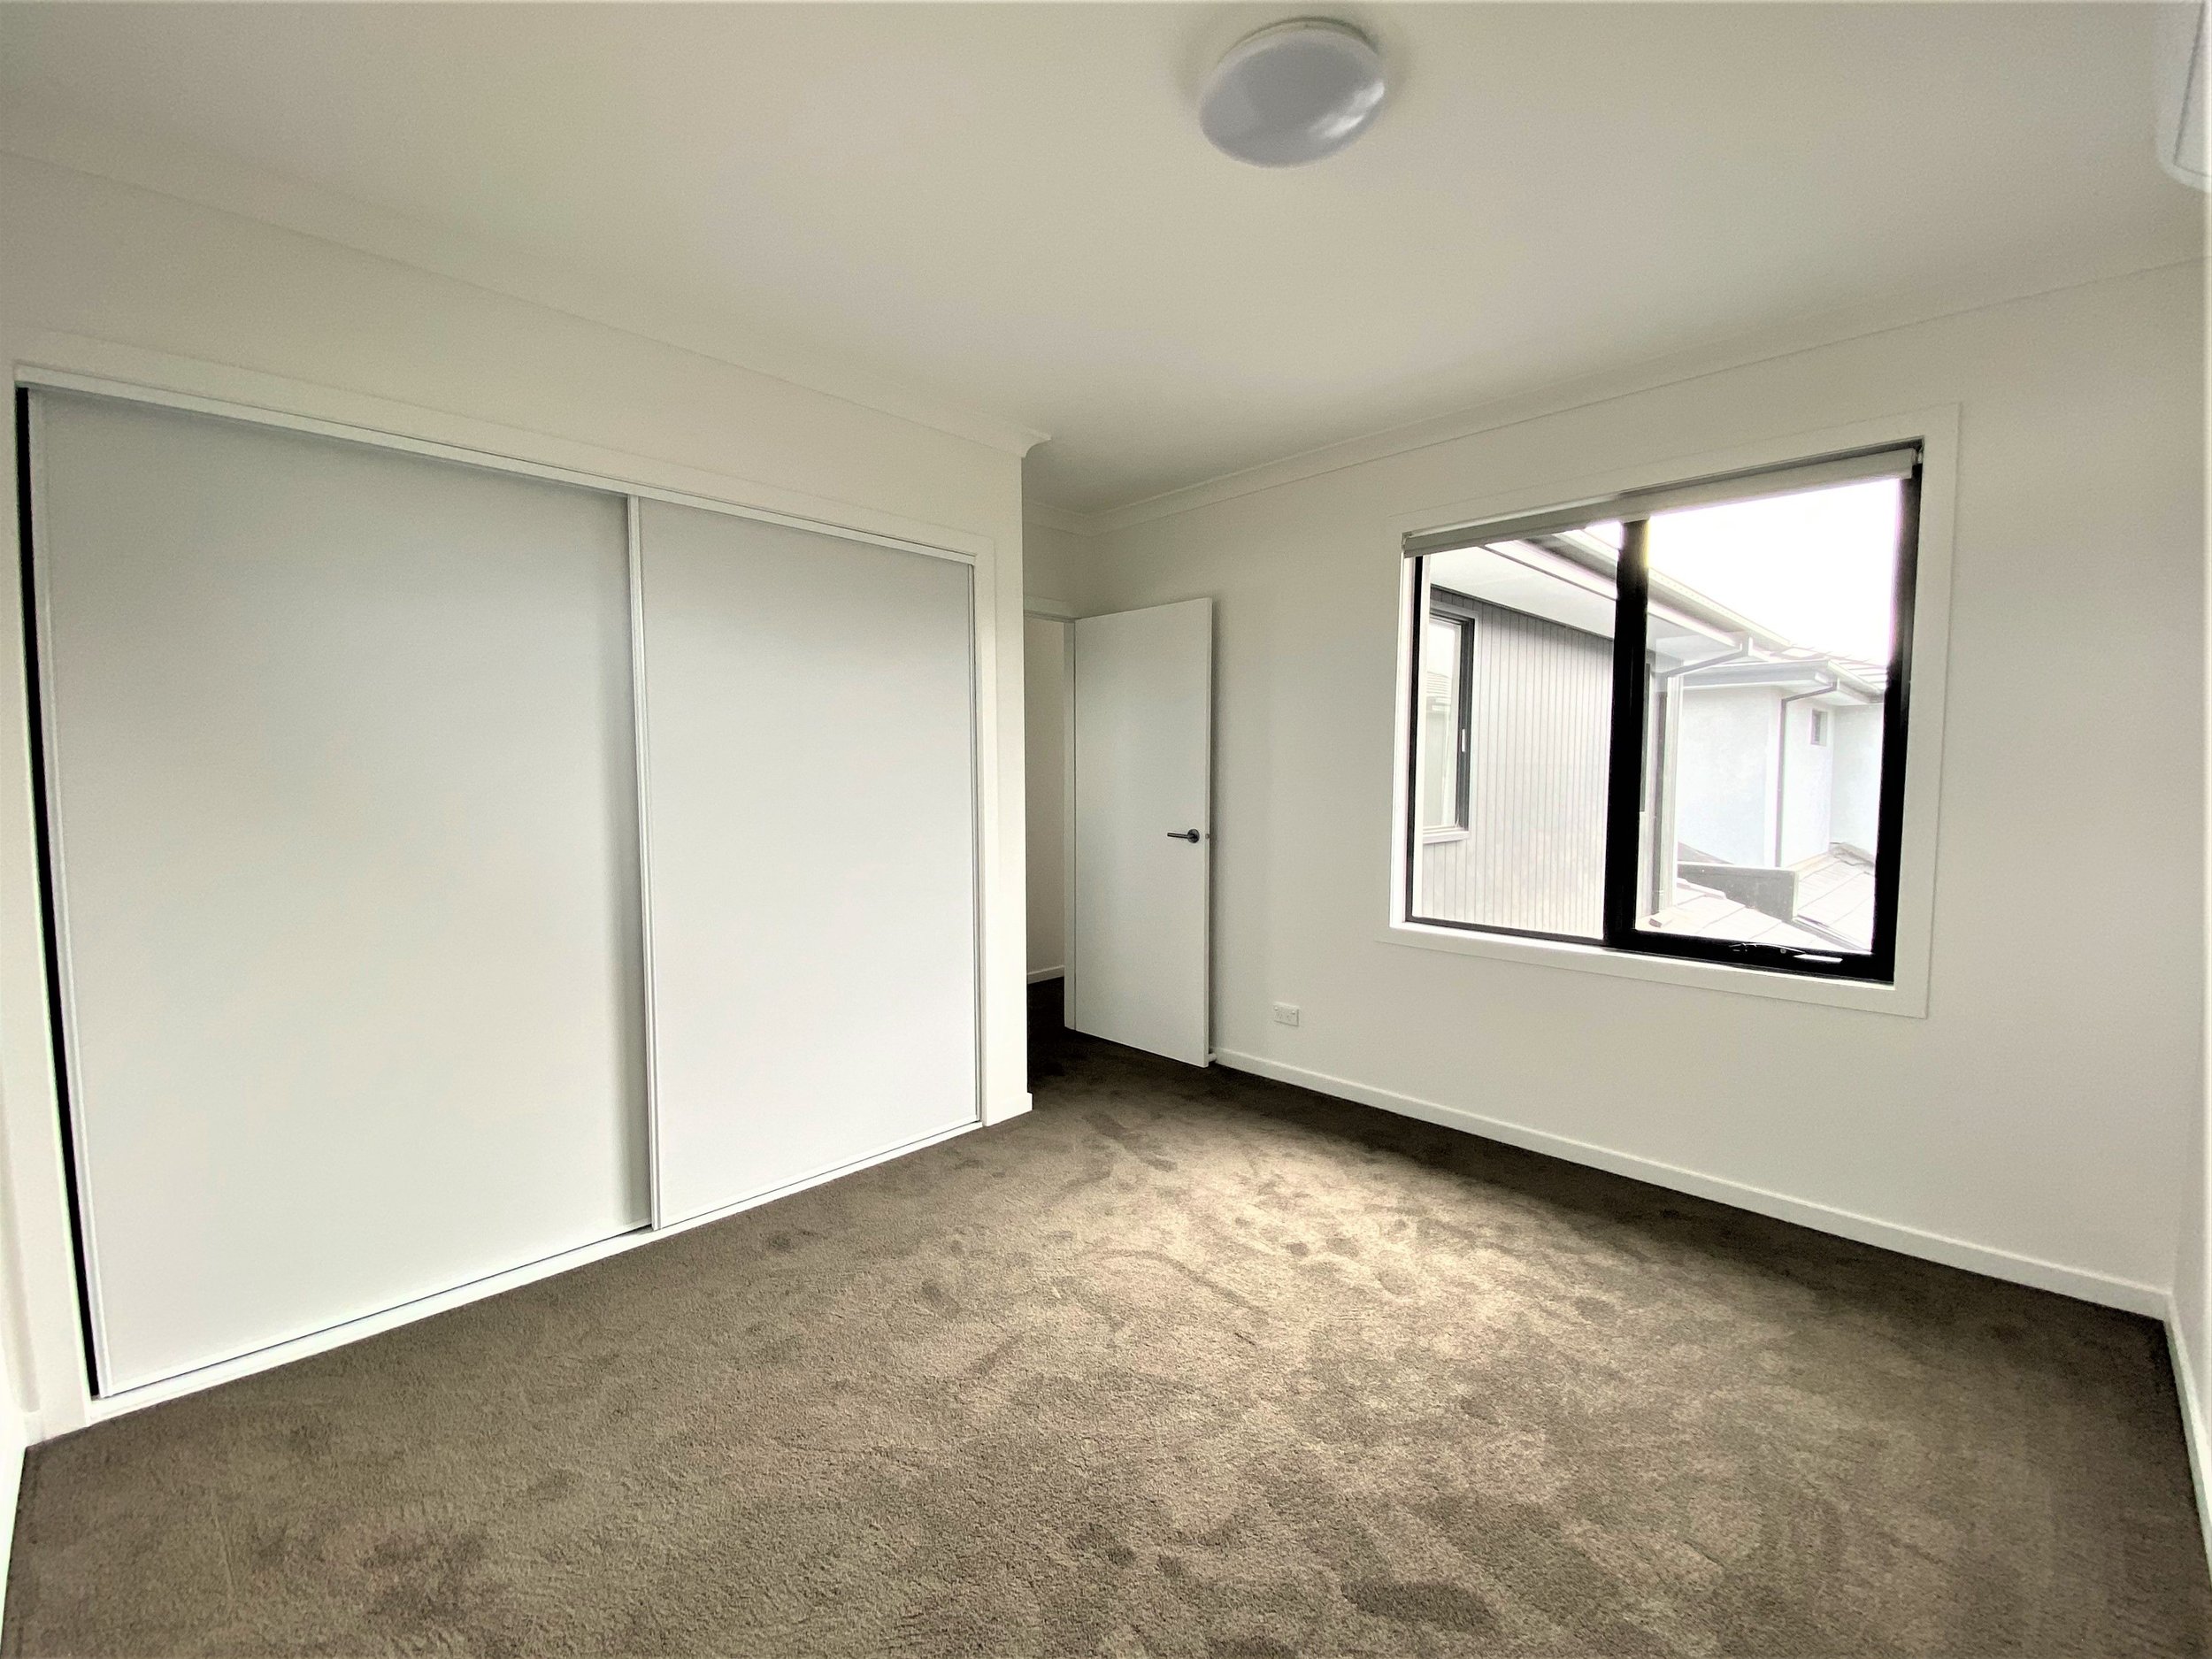 Westmeadows - 15 Hillcrest Drive, Westmeadows, VIC 3049 - Townly - 18.jpg